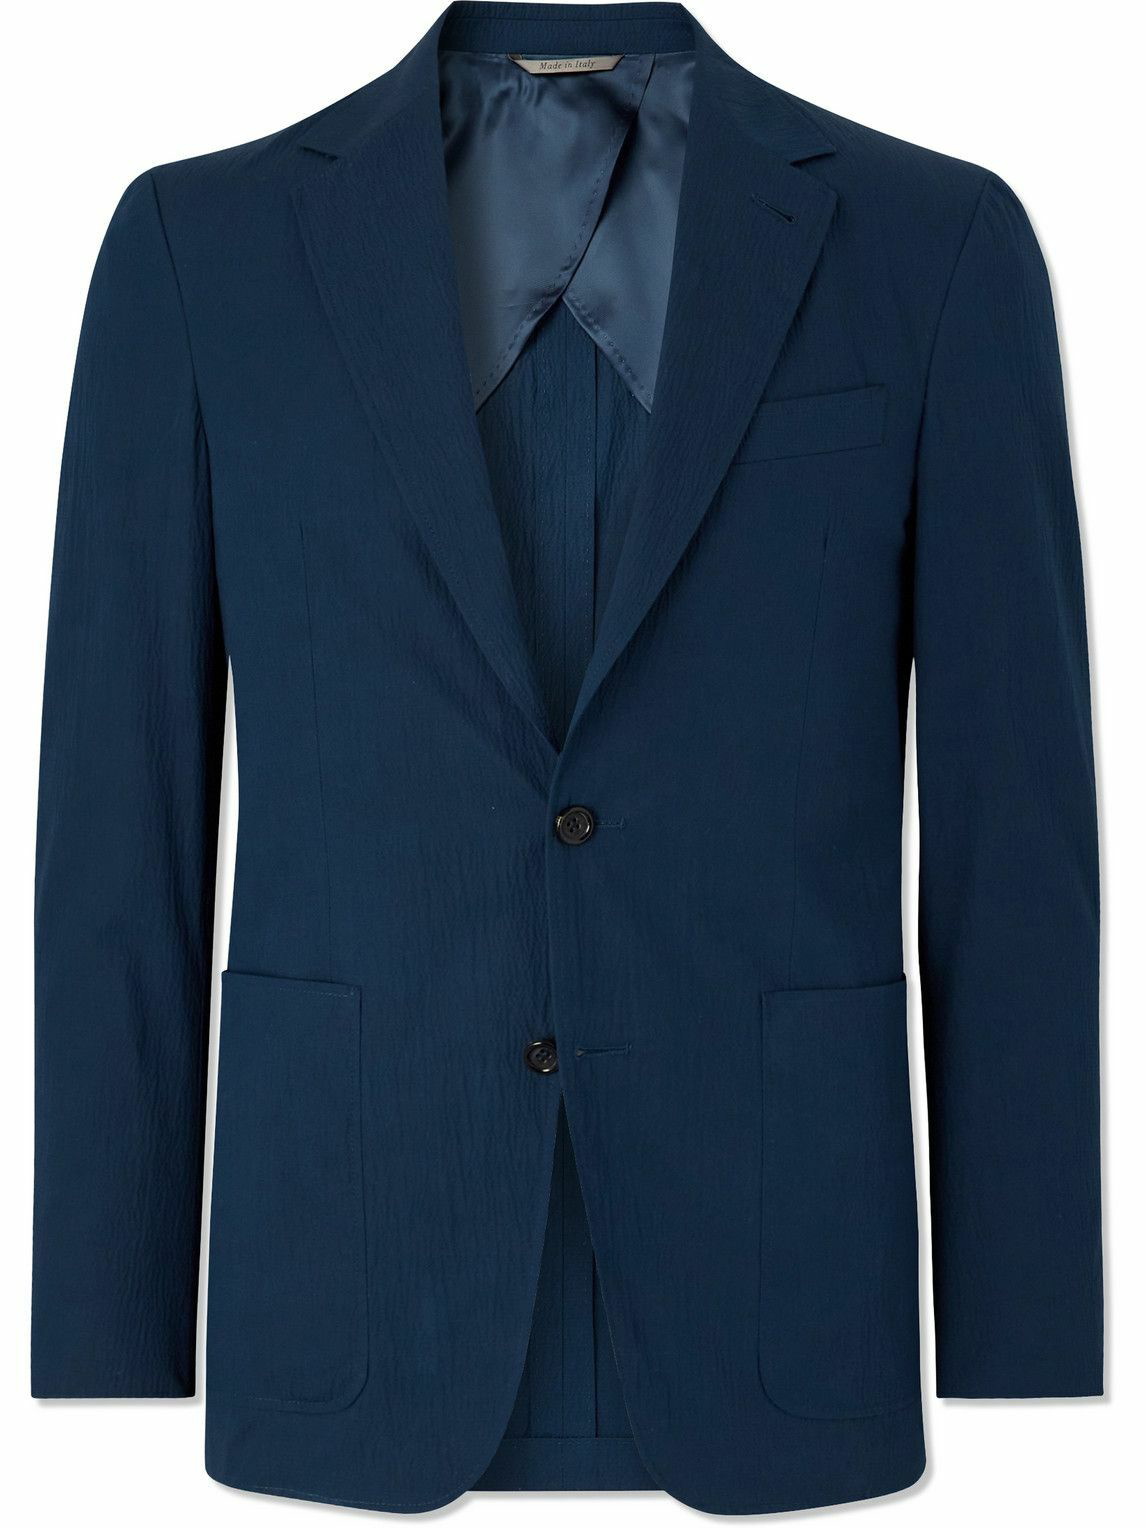 Canali - Stretch-Cotton and Lyocell-Blend Seersucker Suit Jacket - Blue ...